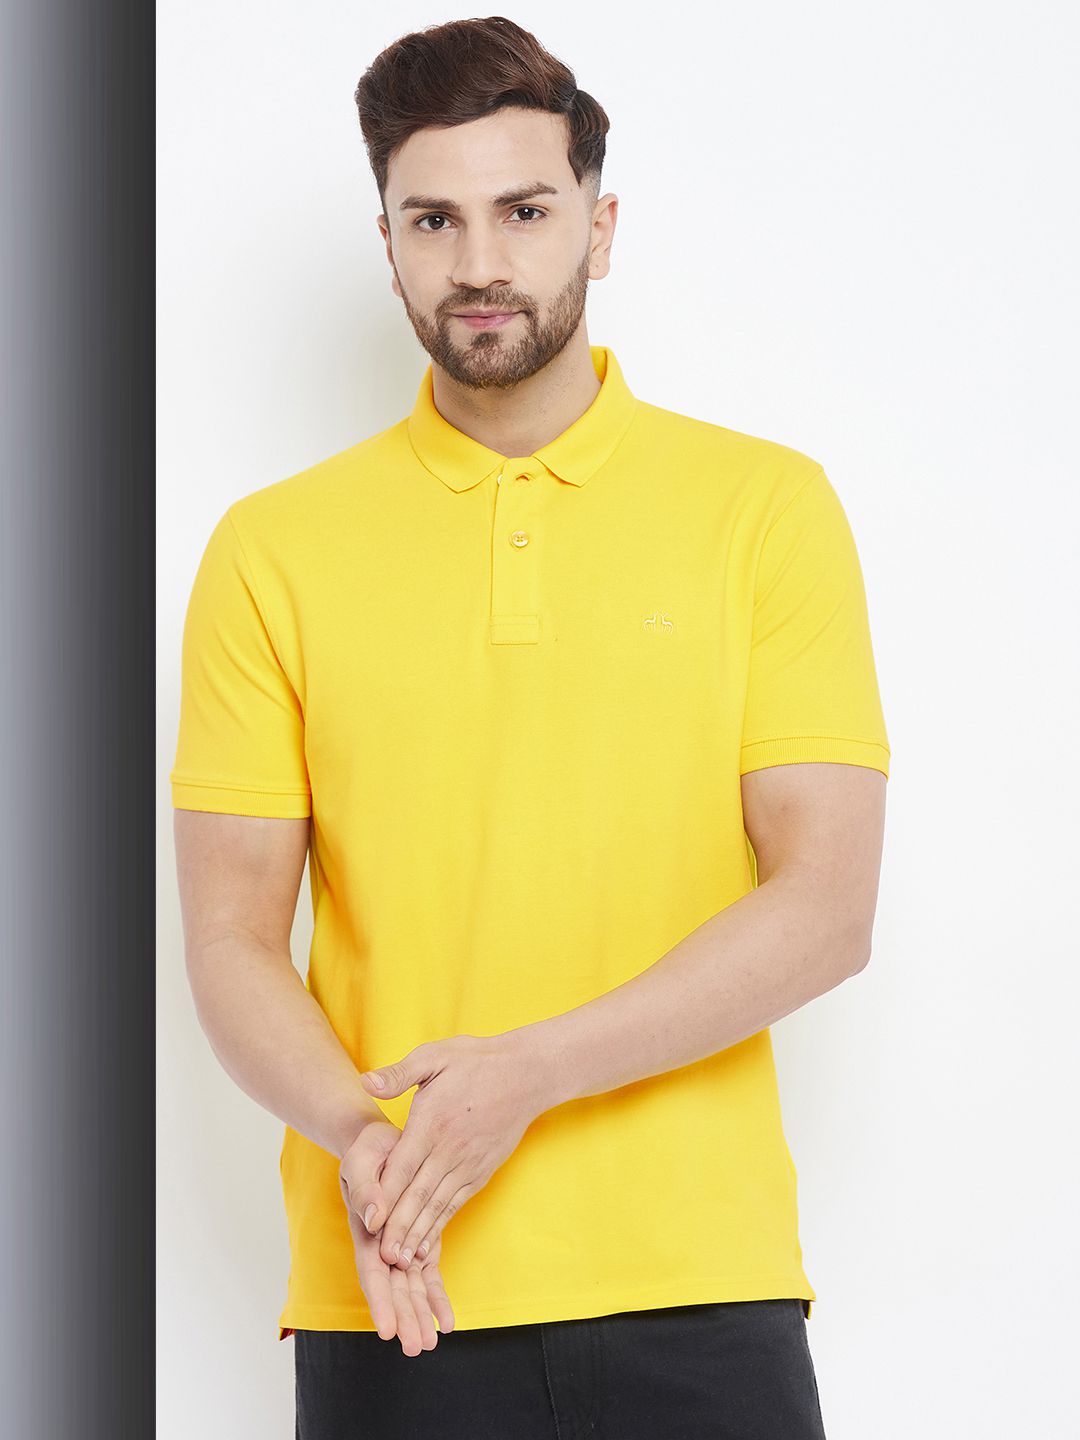     			98 Degree North - Yellow Cotton Blend Regular Fit Men's Polo T Shirt ( Pack of 1 )